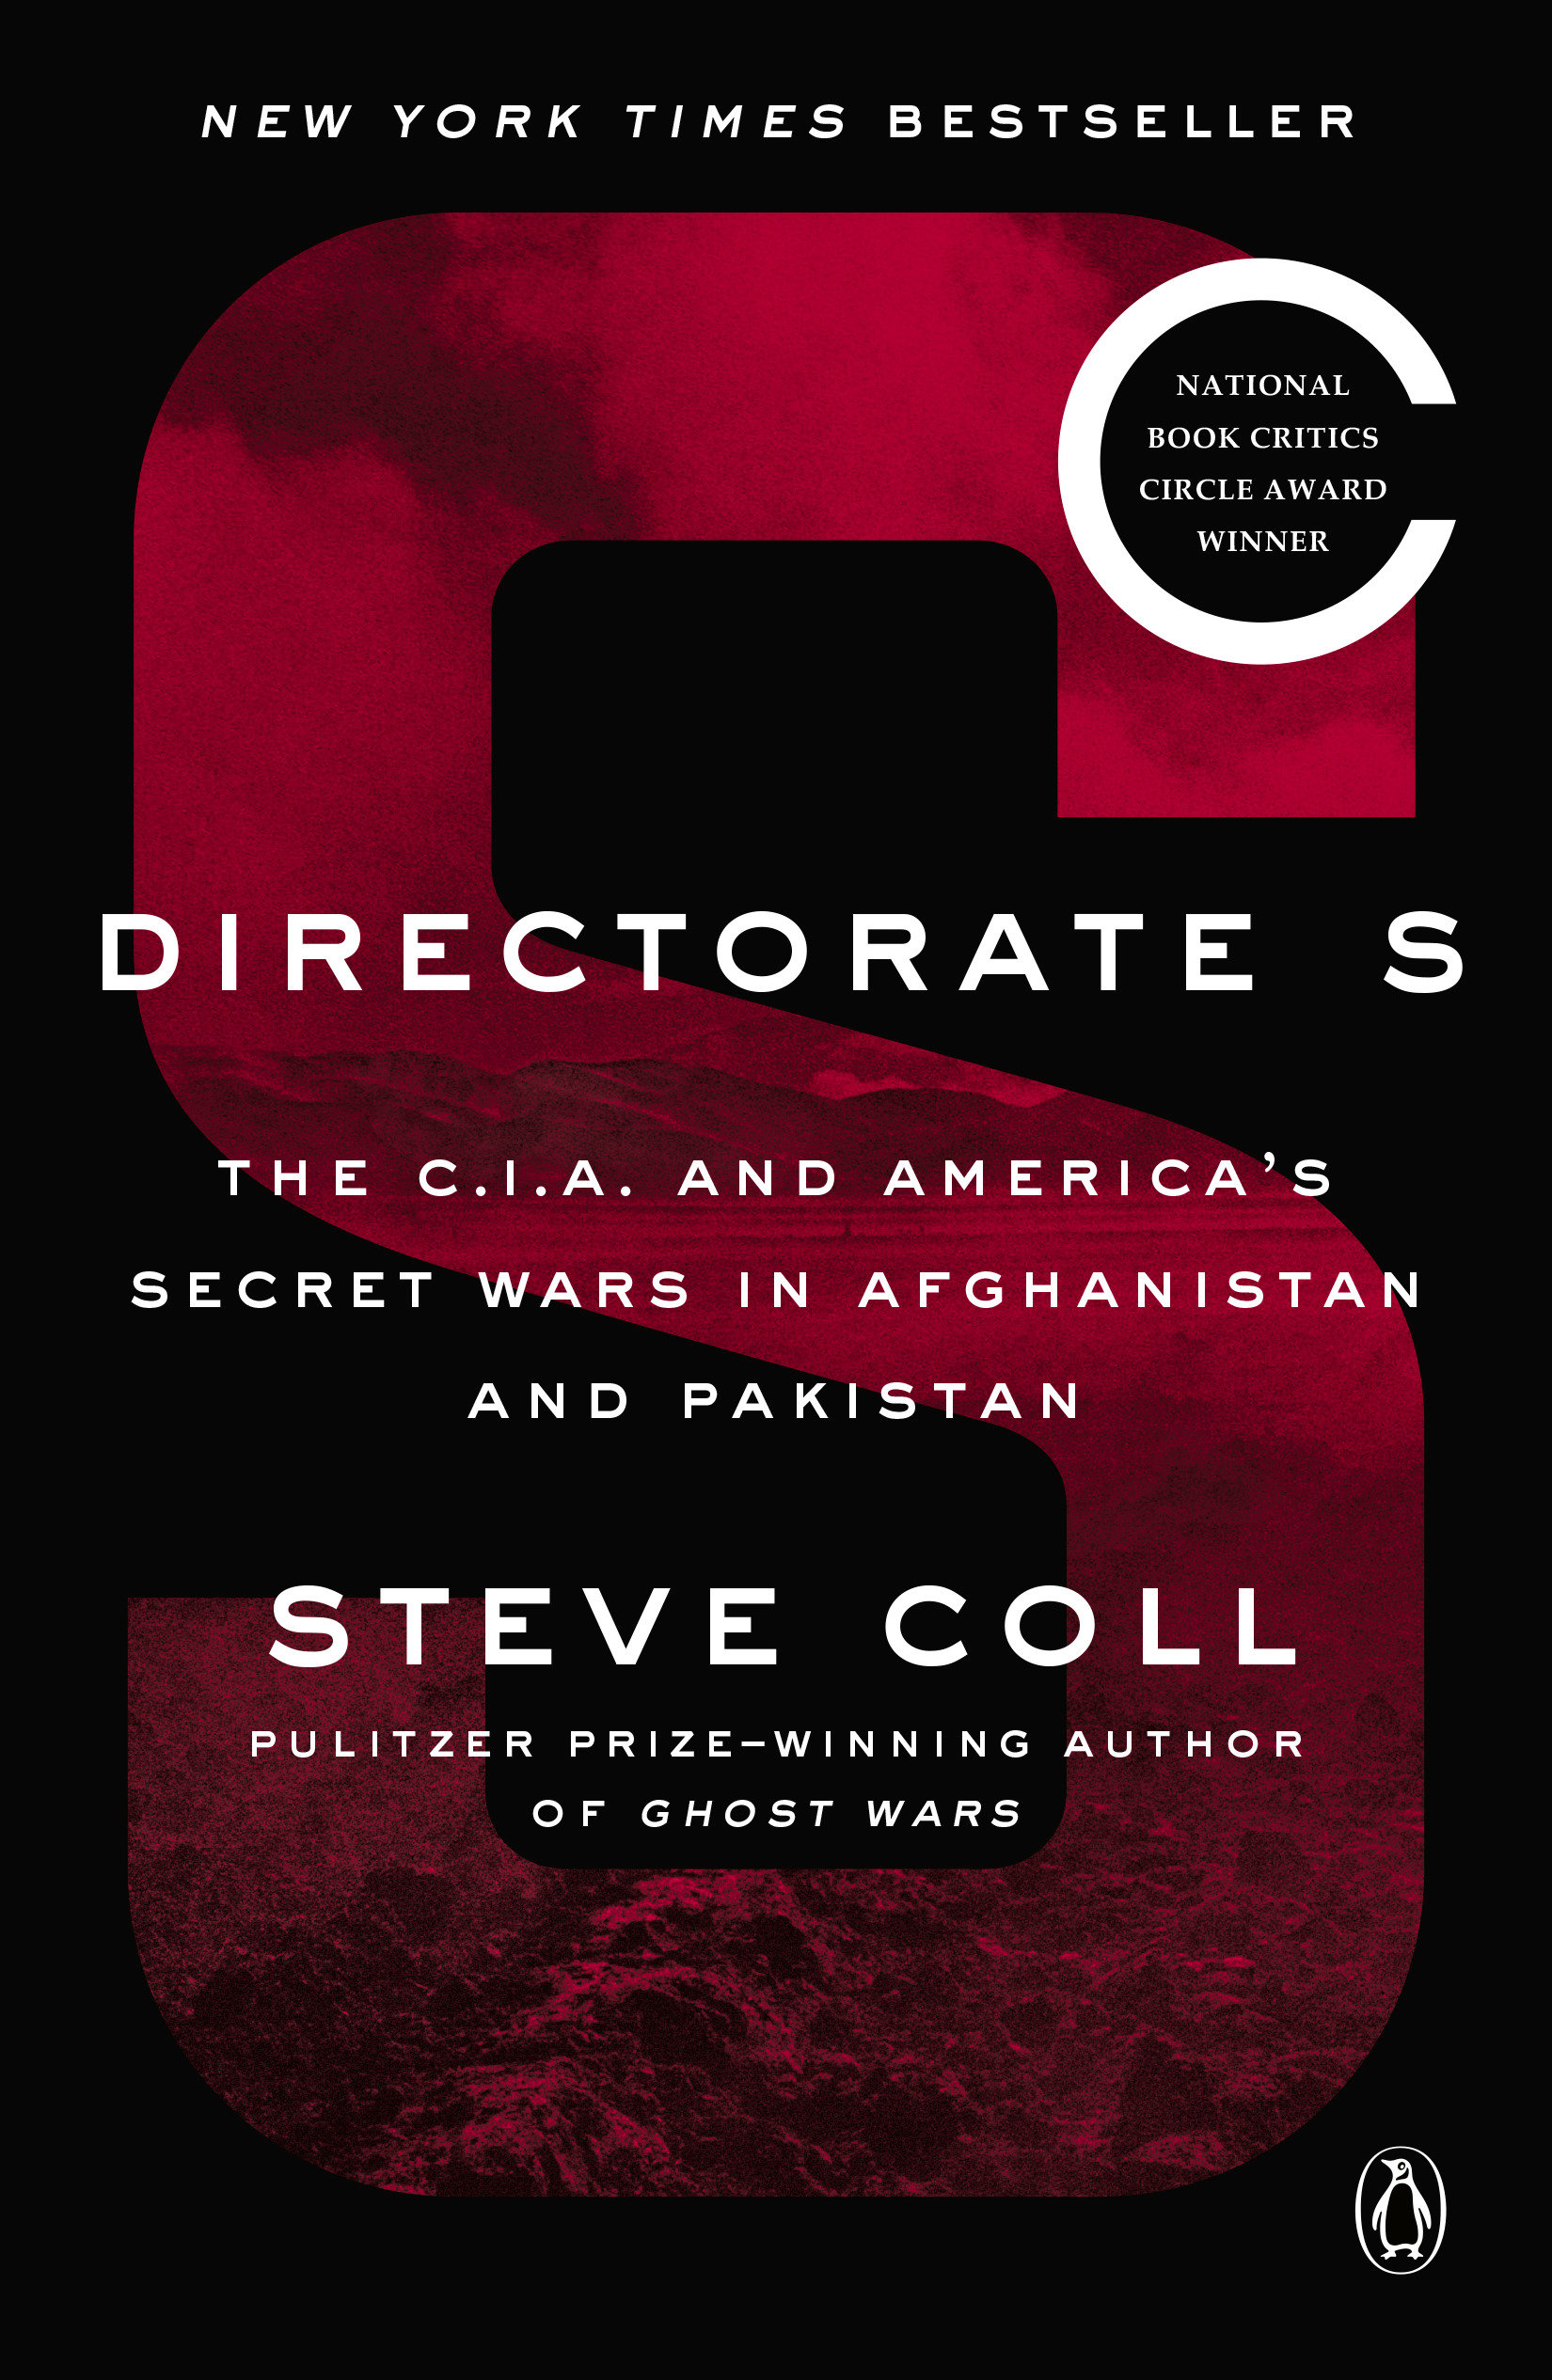 Directorate S the C.I.A. and America's secret wars in Afghanistan and Pakistan cover image